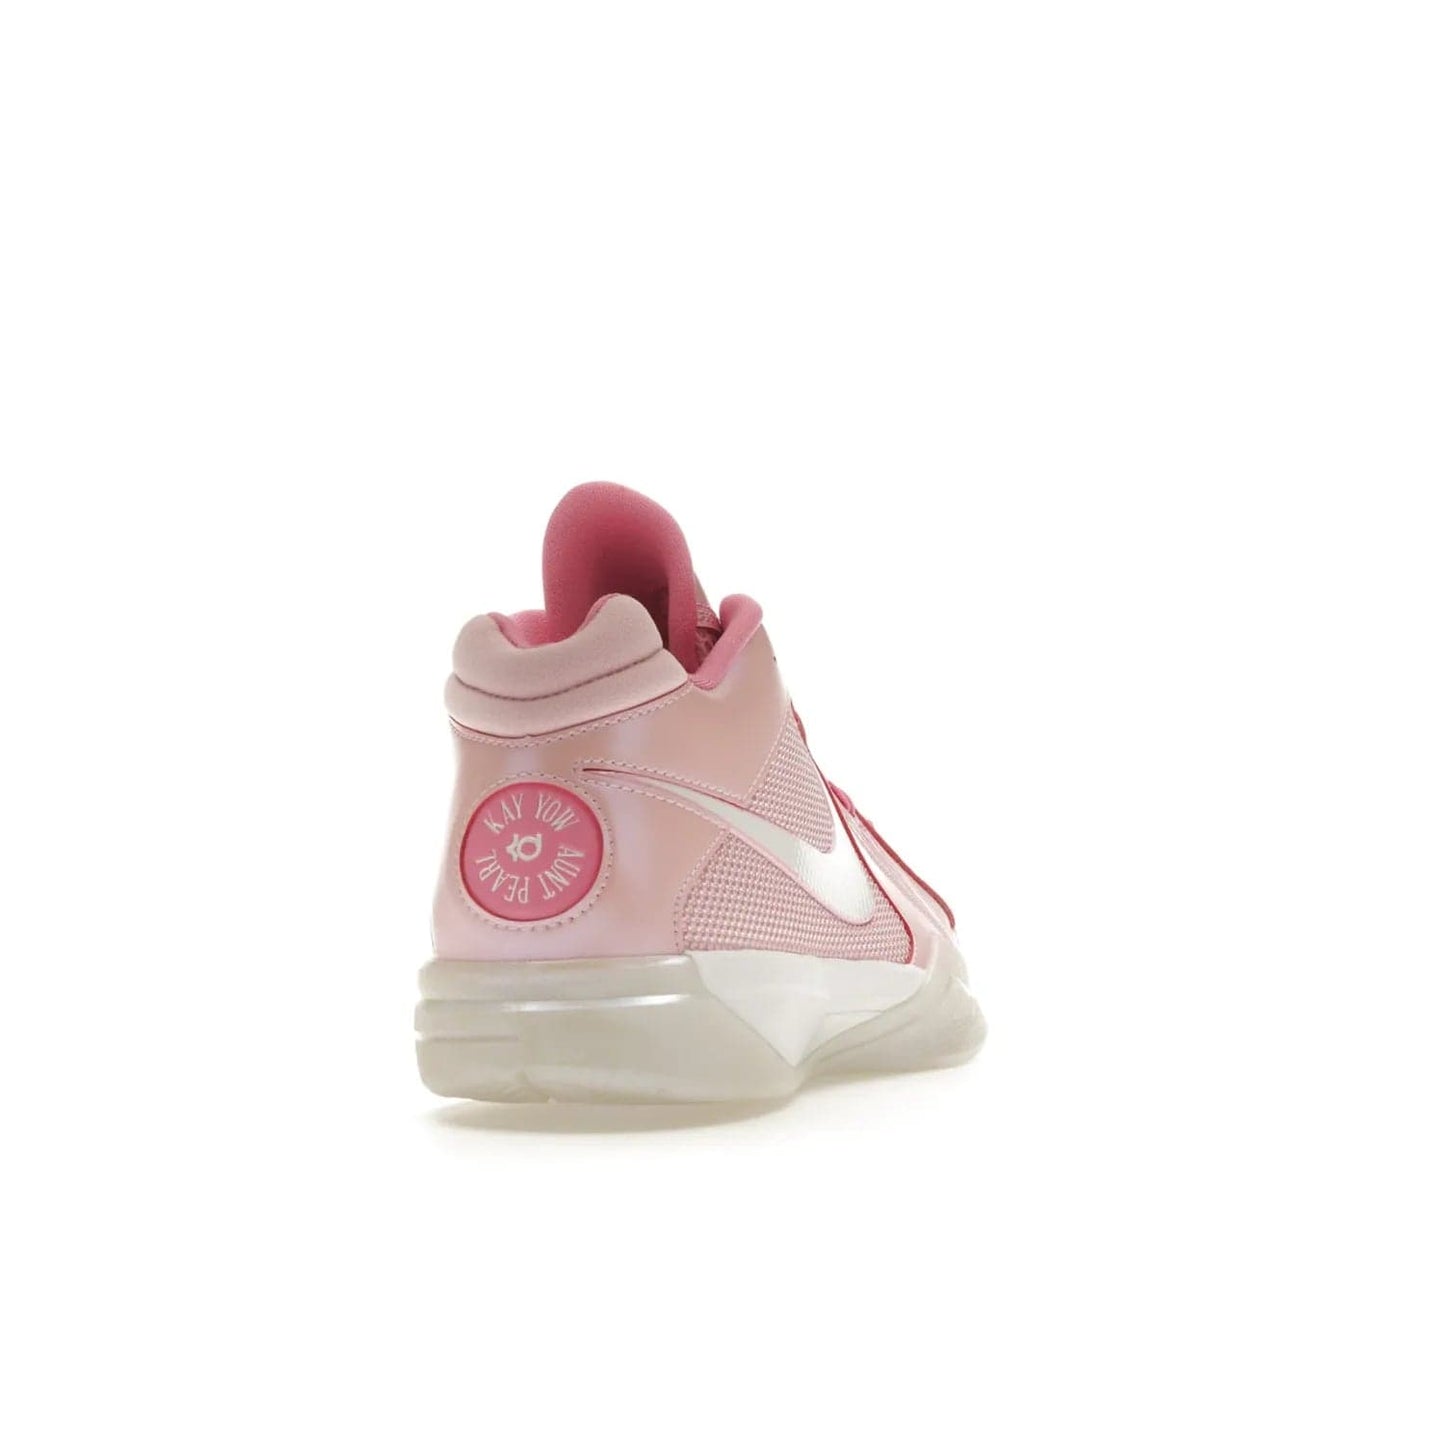 Nike KD 3 Aunt Pearl - Image 30 - Only at www.BallersClubKickz.com - Introducing the Nike KD 3 Aunt Pearl. Featuring a bold Medium Soft Pink, White, & Lotus Pink colorway. Get ready to stand out this October 15th.